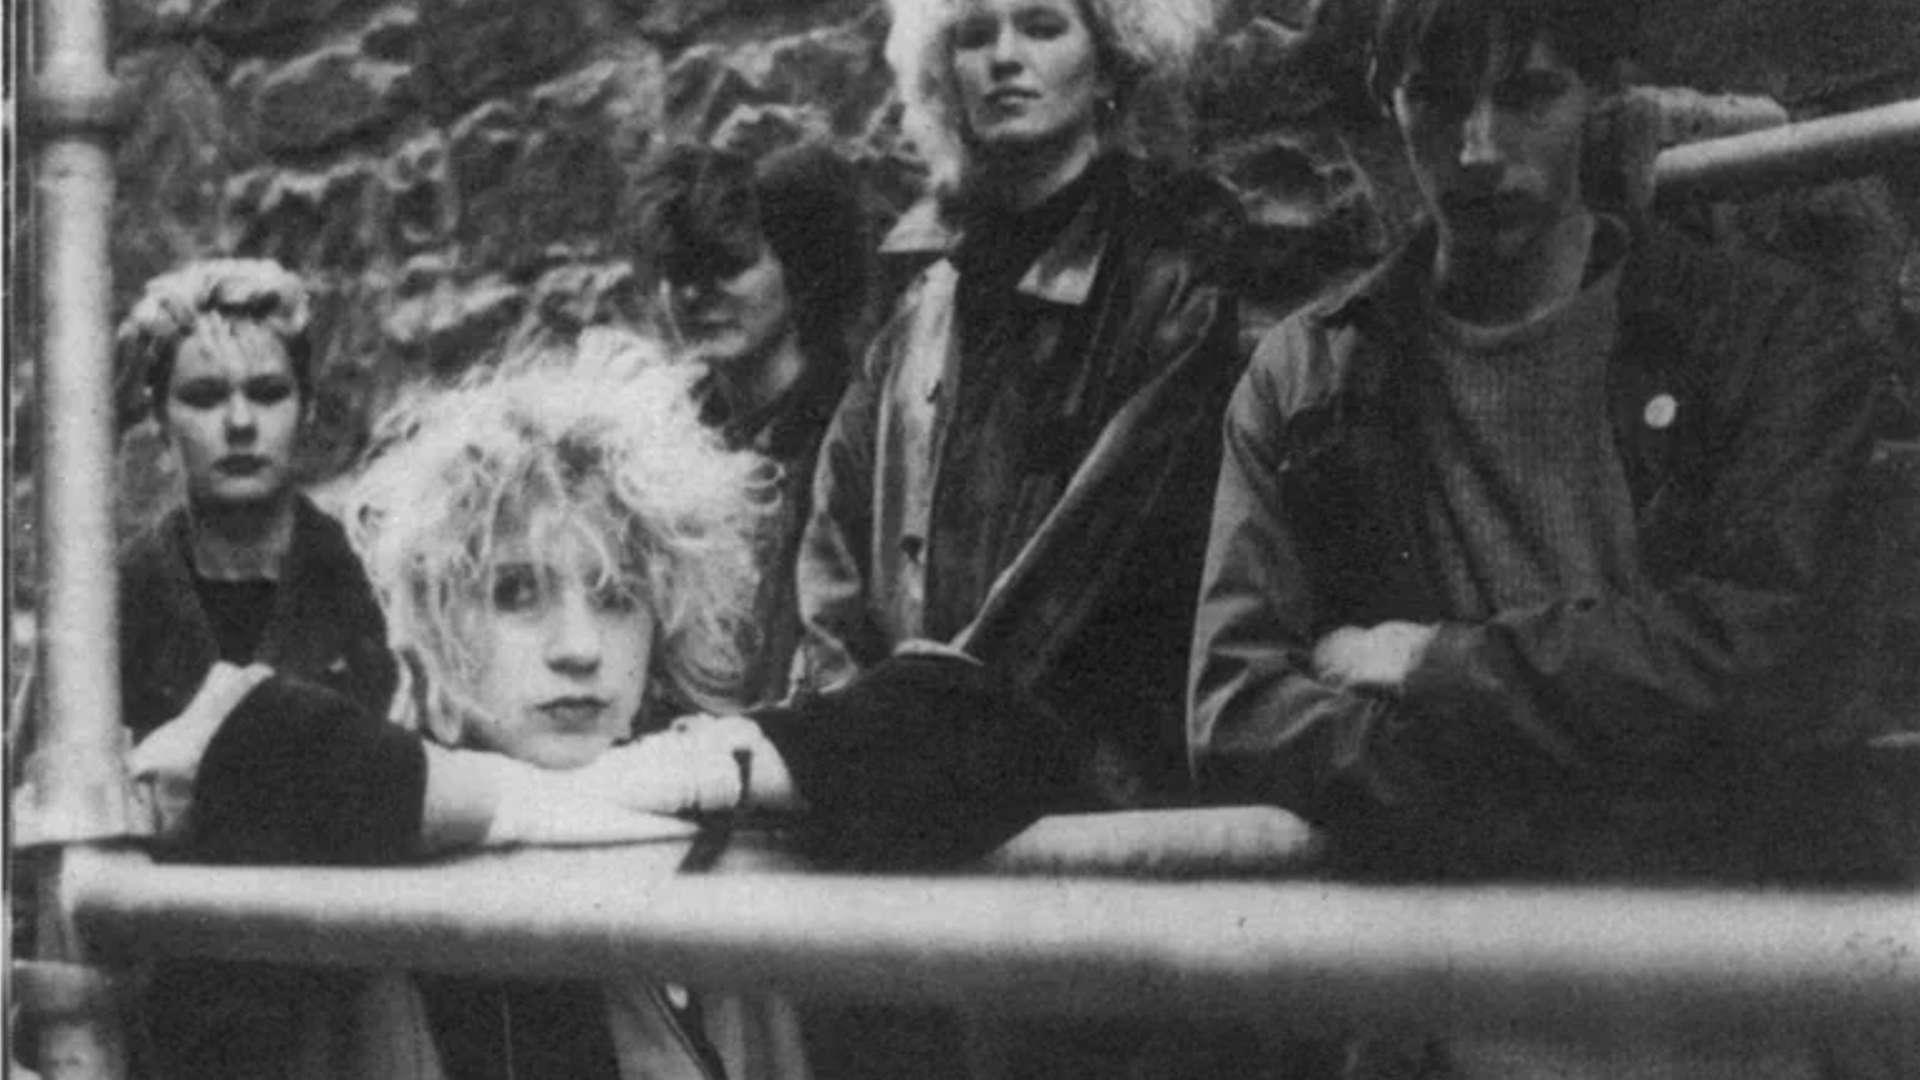 35 Years Ago: SHOP ASSISTANTS record their first Peel Session